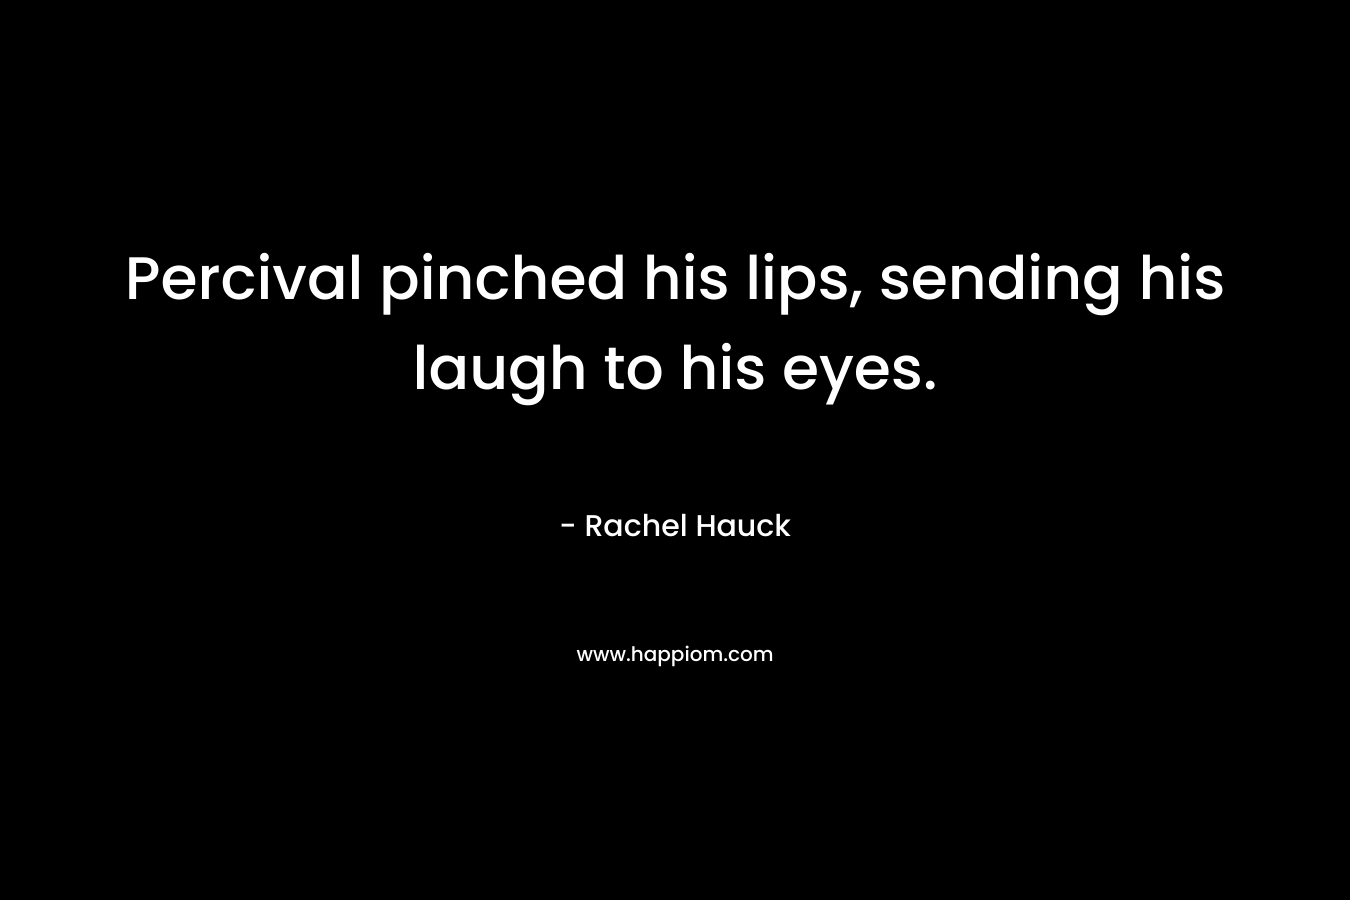 Percival pinched his lips, sending his laugh to his eyes. – Rachel Hauck